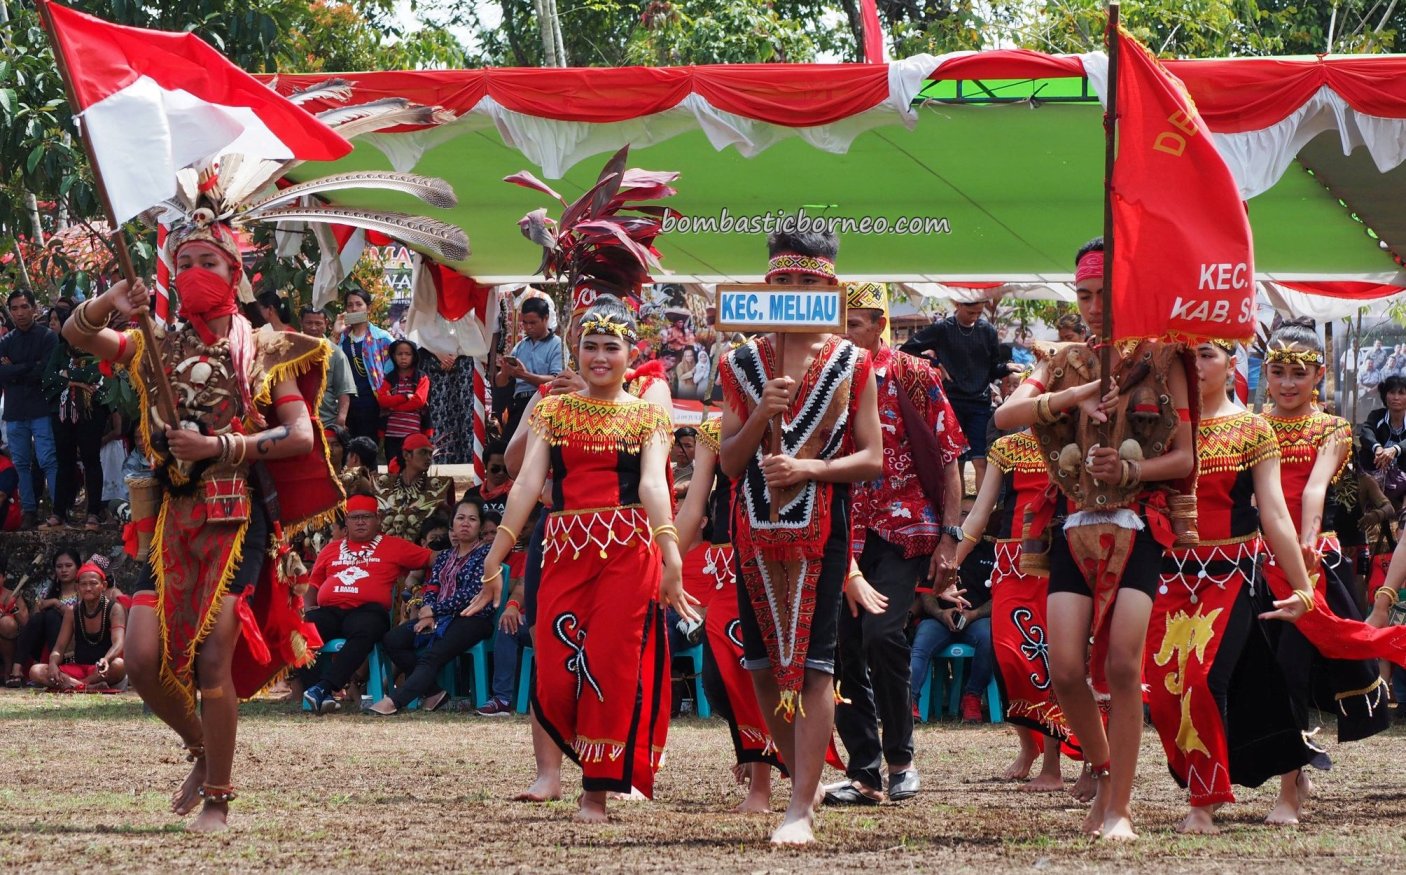 Dayak Sanggau, harvest festival, indigenous, backpackers, culture, event, Indonesia, native, tribal, Tourism, tourist attraction, travel guide, cross border, 穿越婆罗洲游踪, 印尼西加里曼丹, 达雅克丰收节日旅游